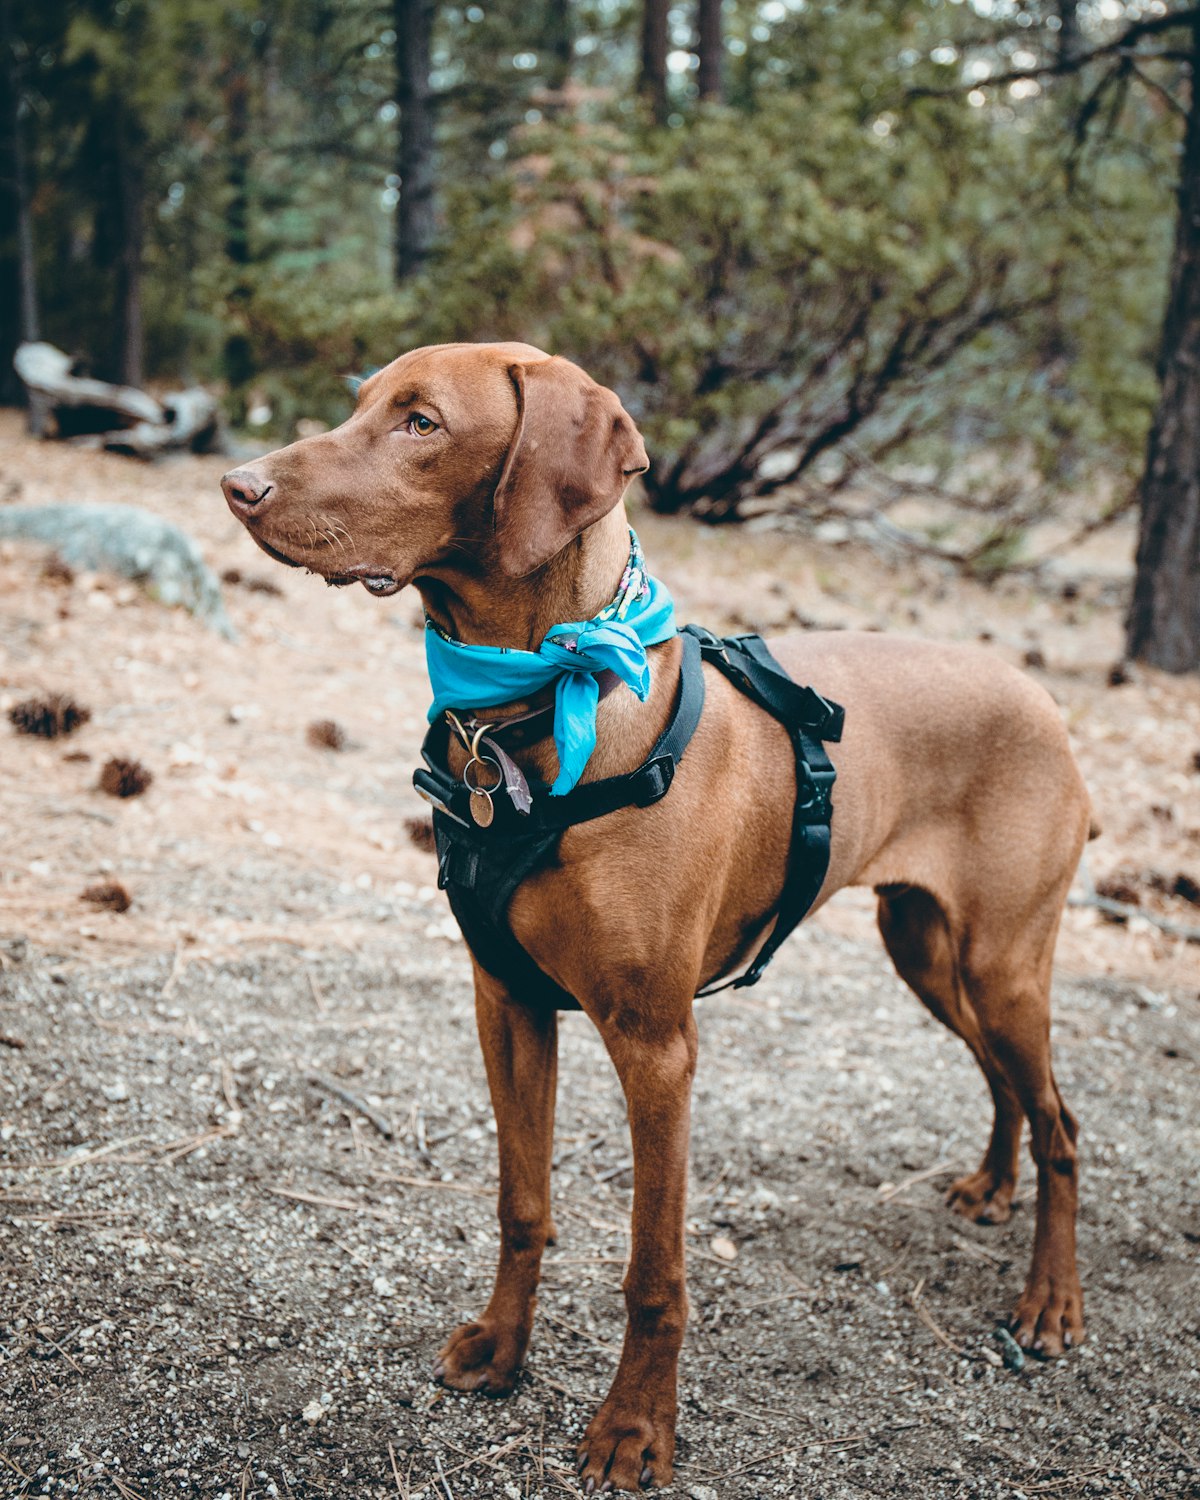 Take Your Best Friend on an Adventure with a Dog Hiking Harness!